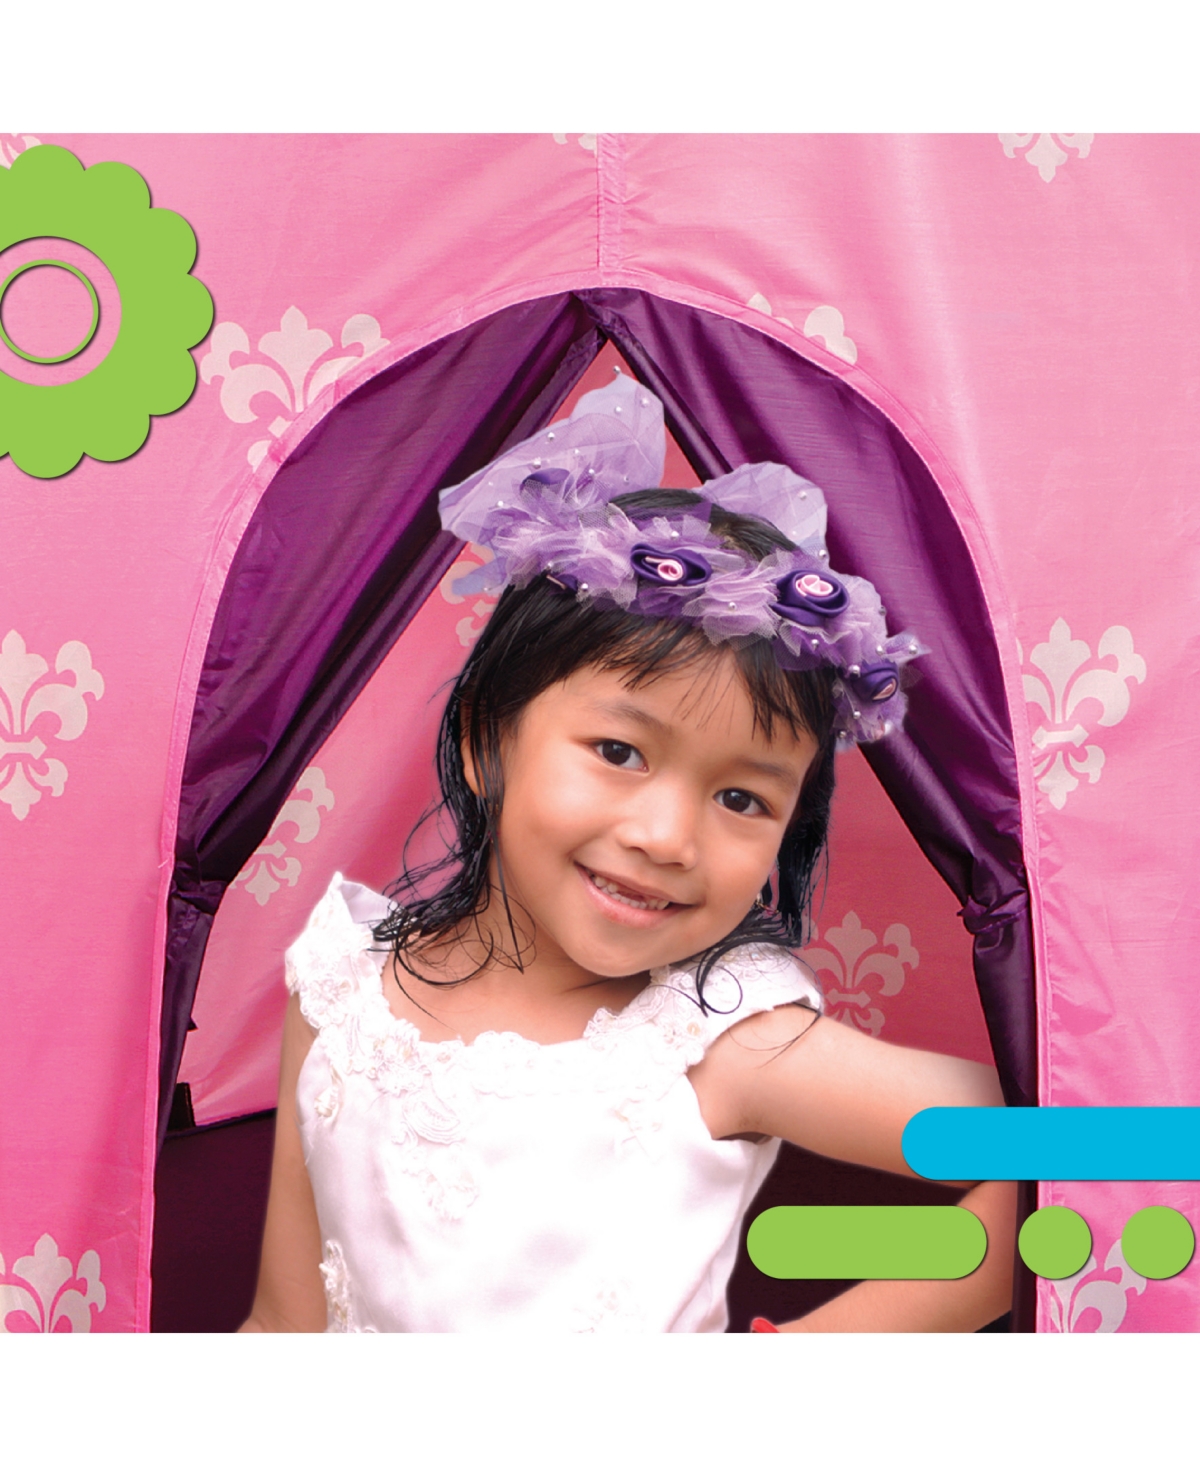 Shop Discovery Princess Castle Royal Play Tent In Pink